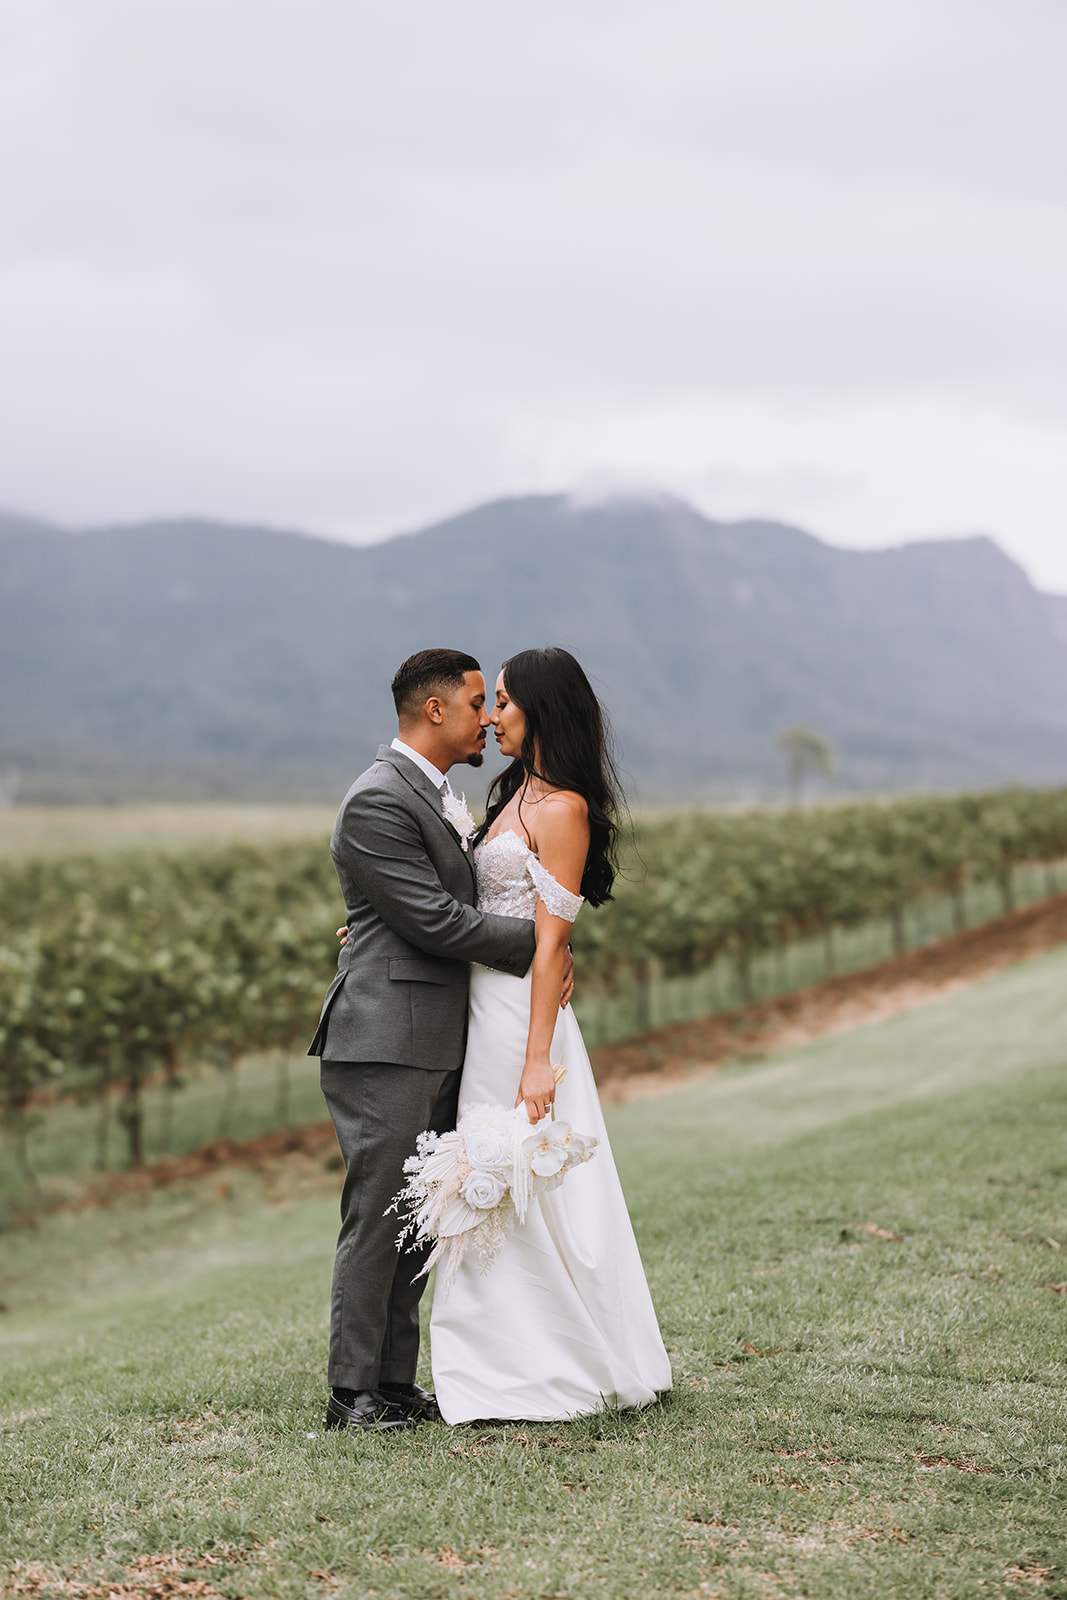 Hunter Valley Wedding Planner - Real Wedding: Kristie + Cole. Estate Tuscany. Photos by Nicole Butler Photography